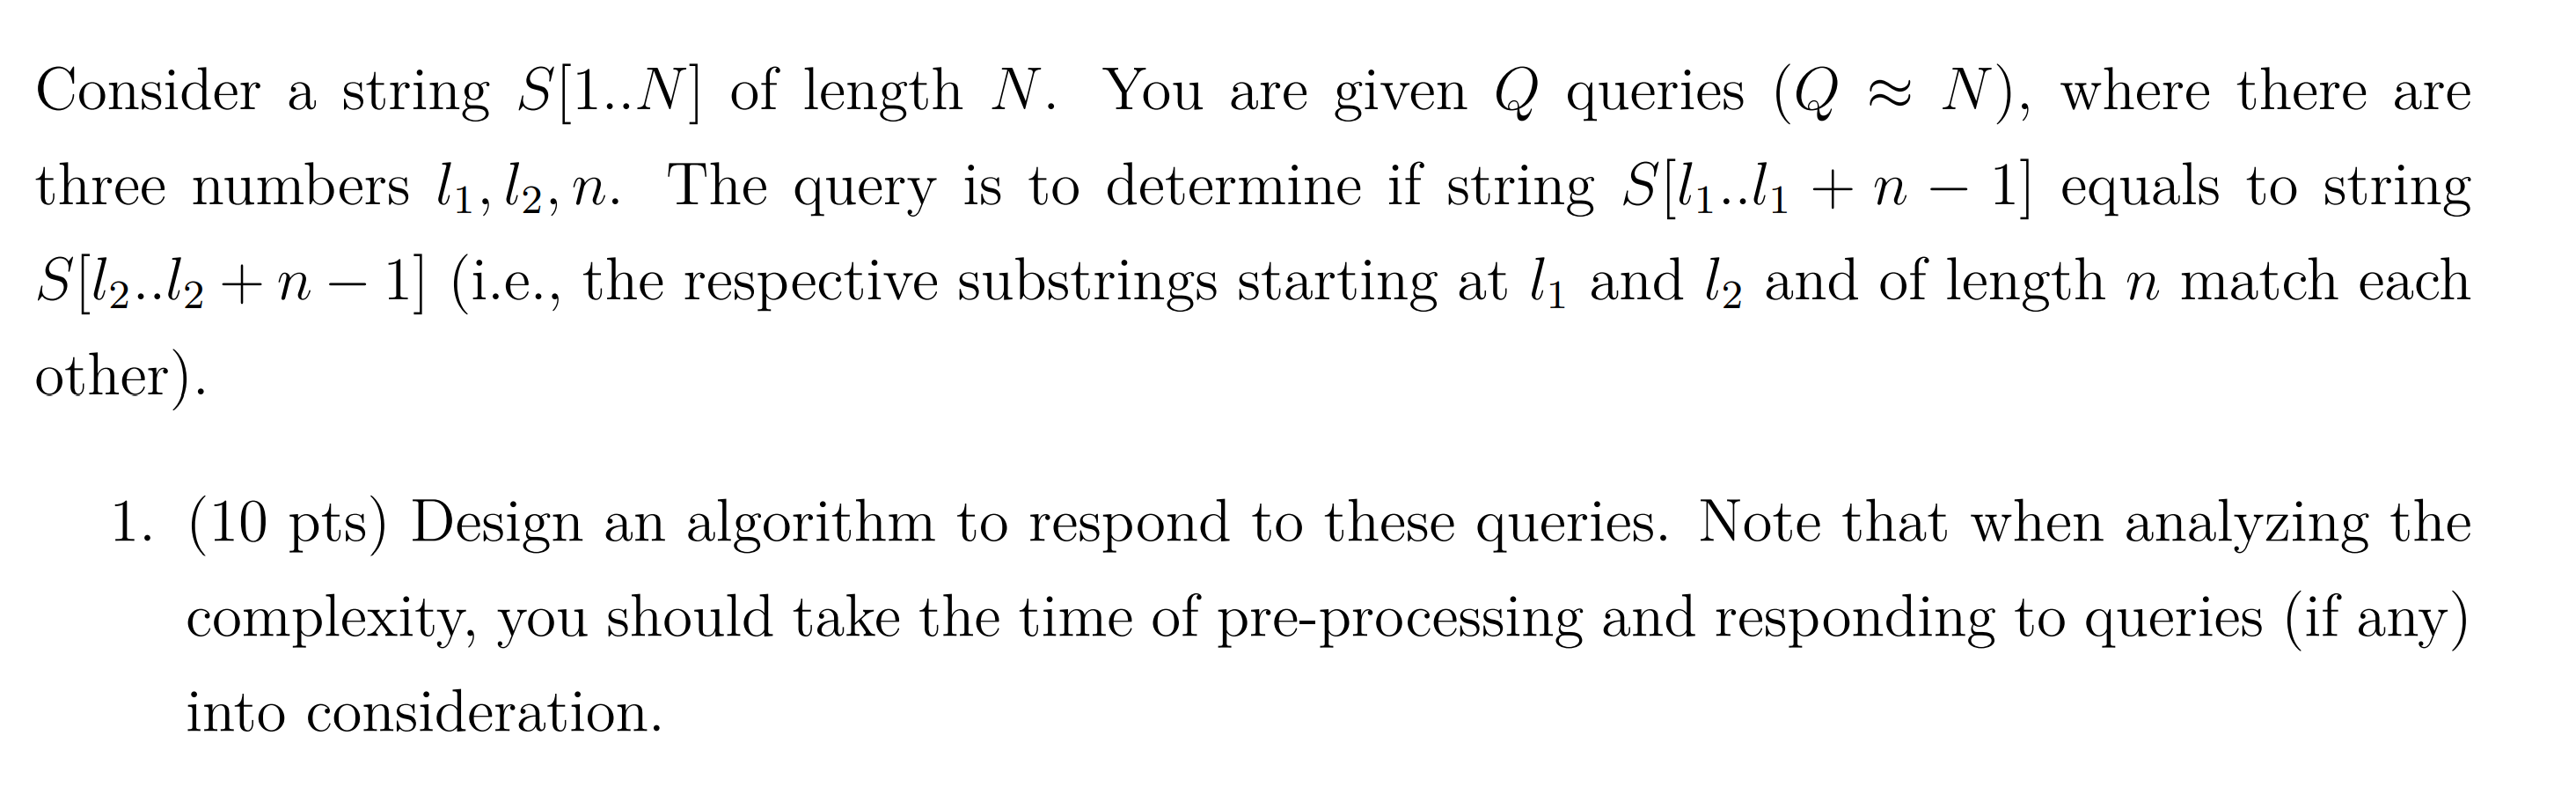 Consider a string S[1..N] of length N. You are given Q queries (Q N), where there are three numbers 11, 12,